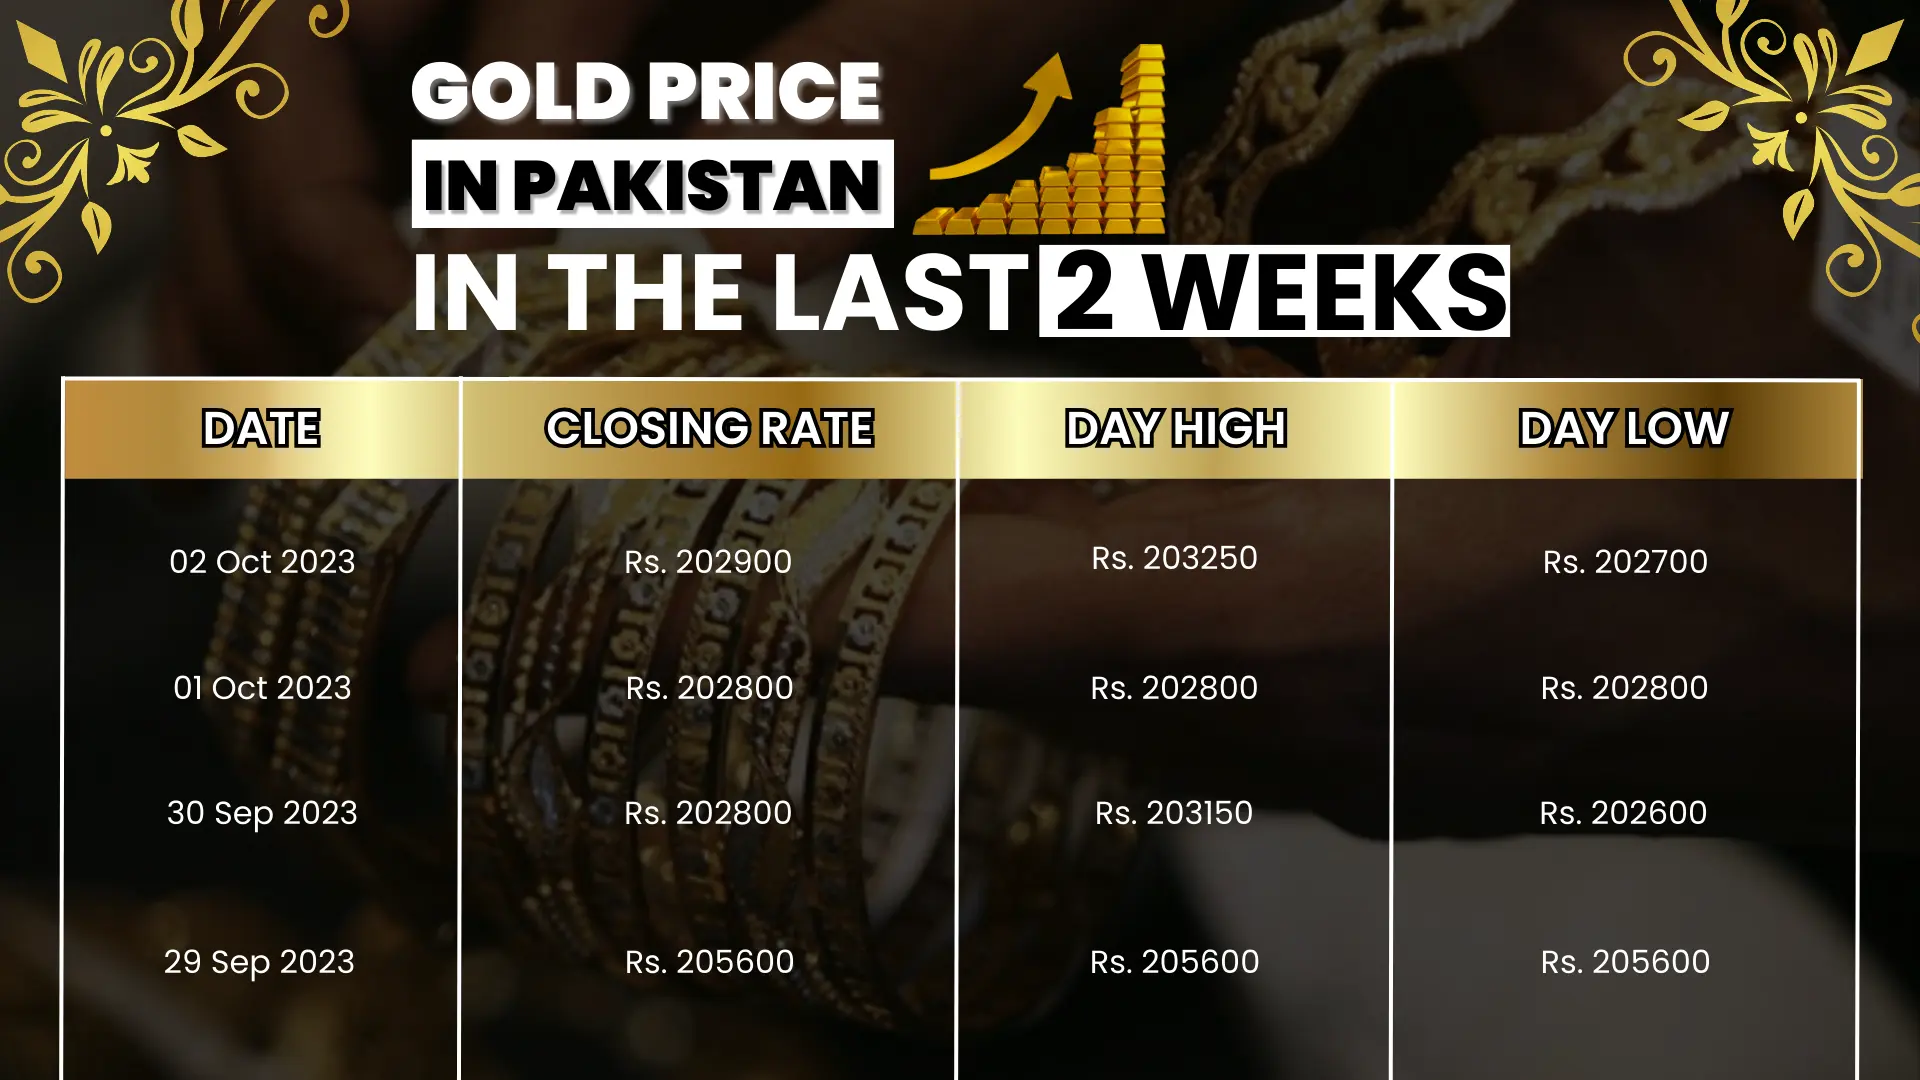 Gold Price in Pakistan in the Last 2 Weeks